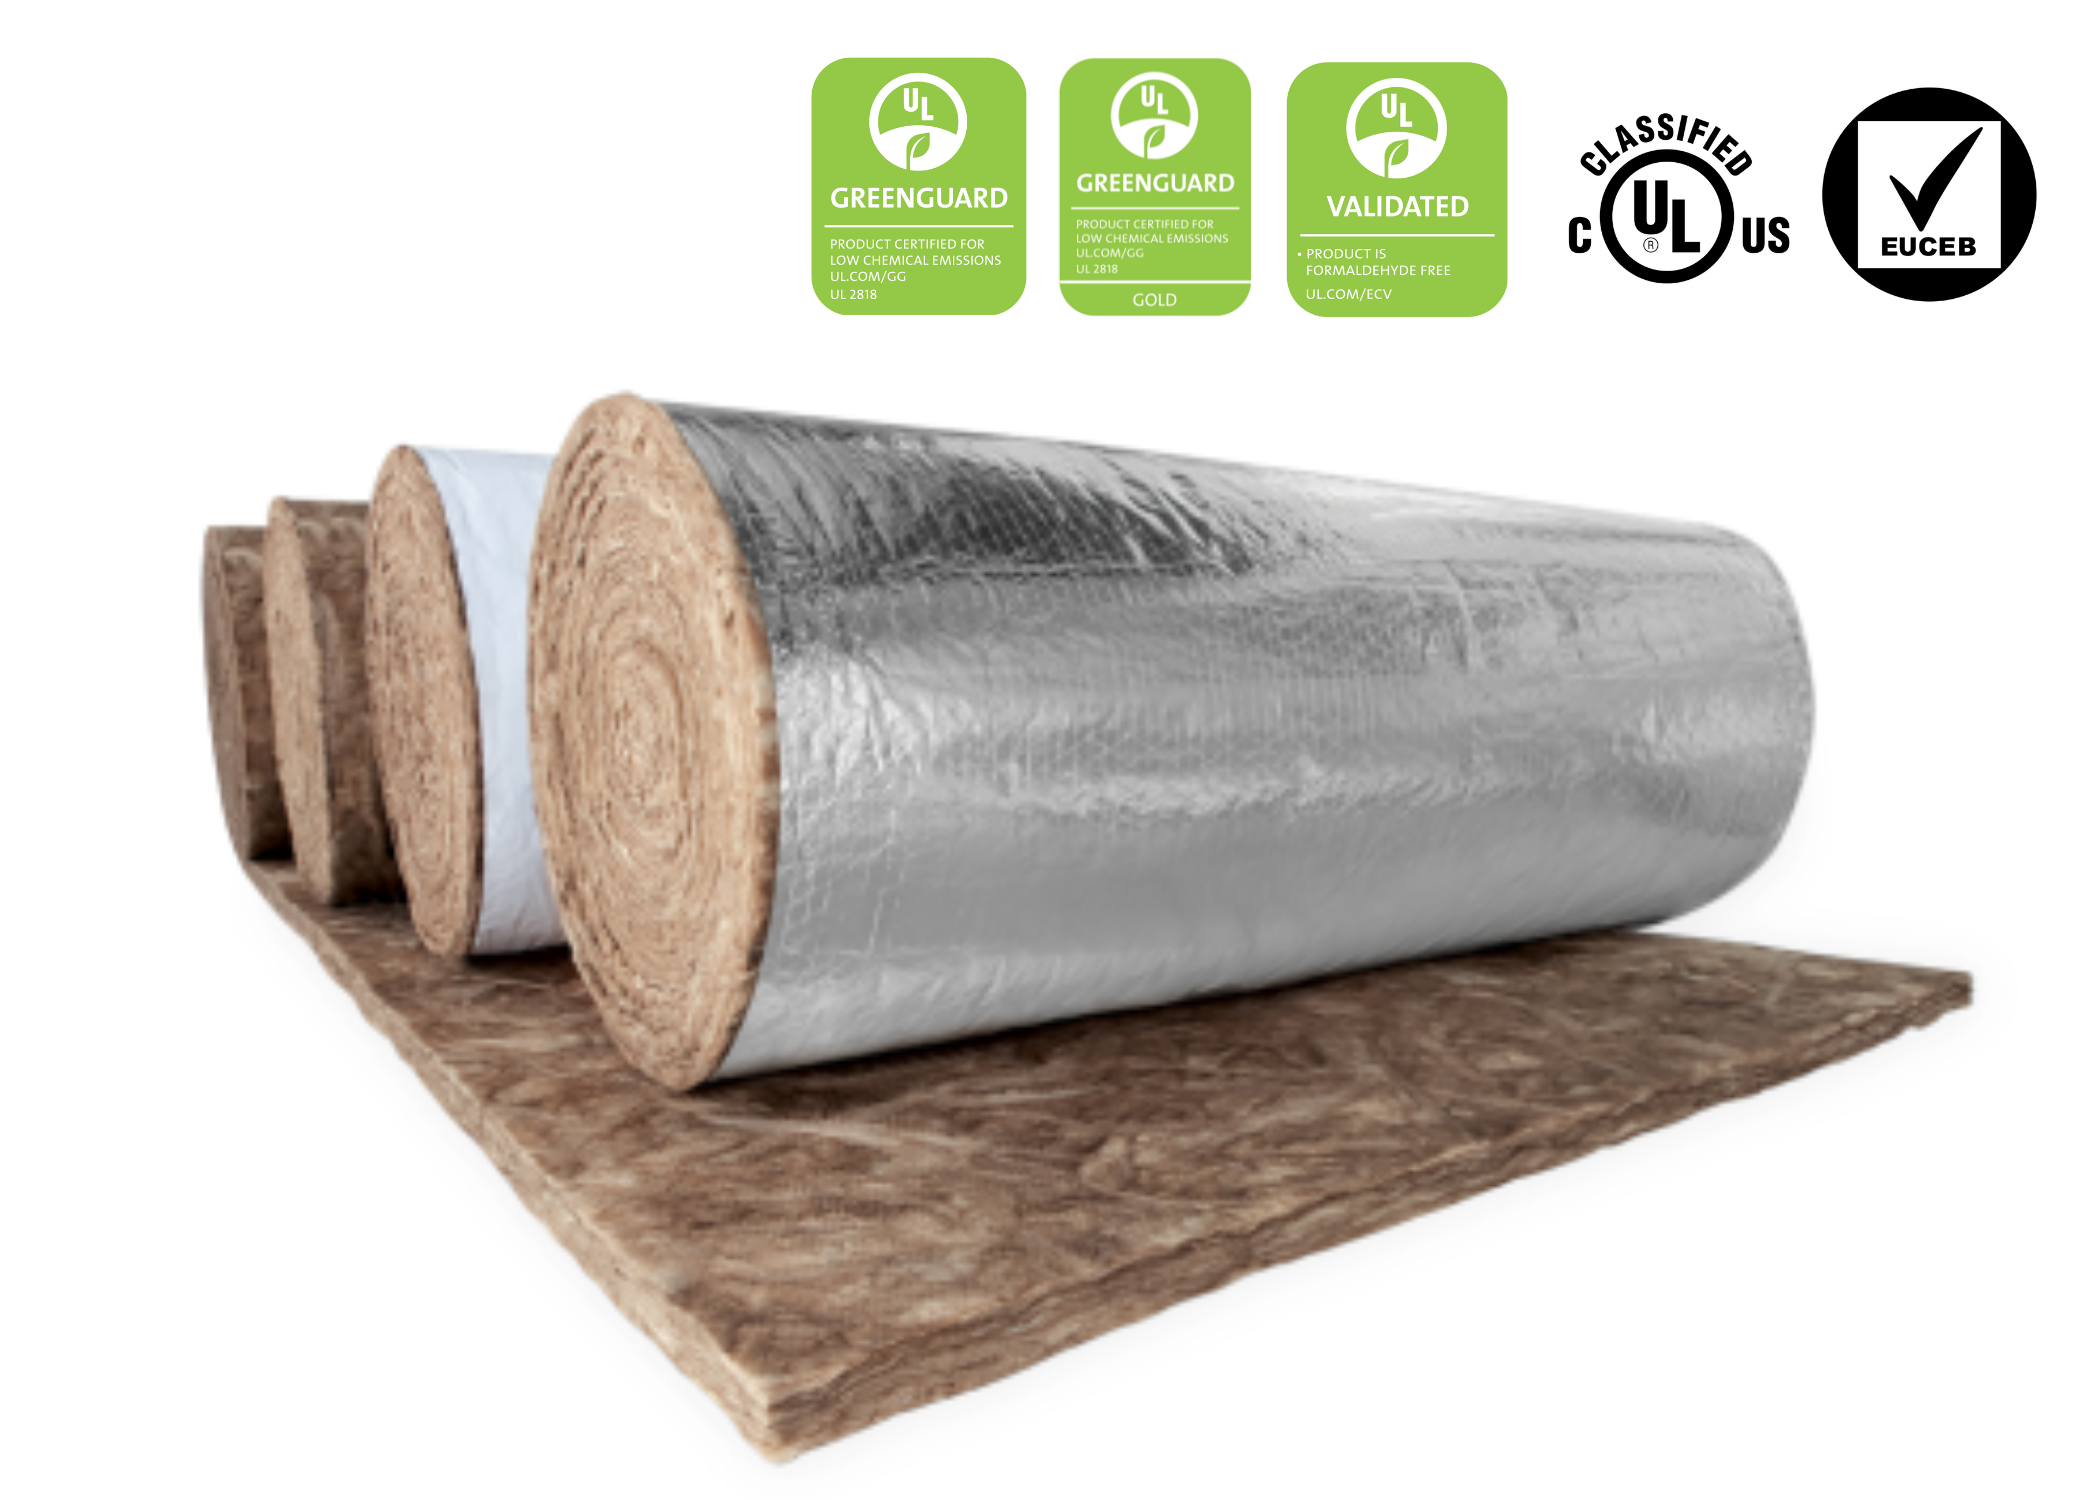 Fiberglass Duct Liner vs. Rubber Duct Liner: Which Is Better?